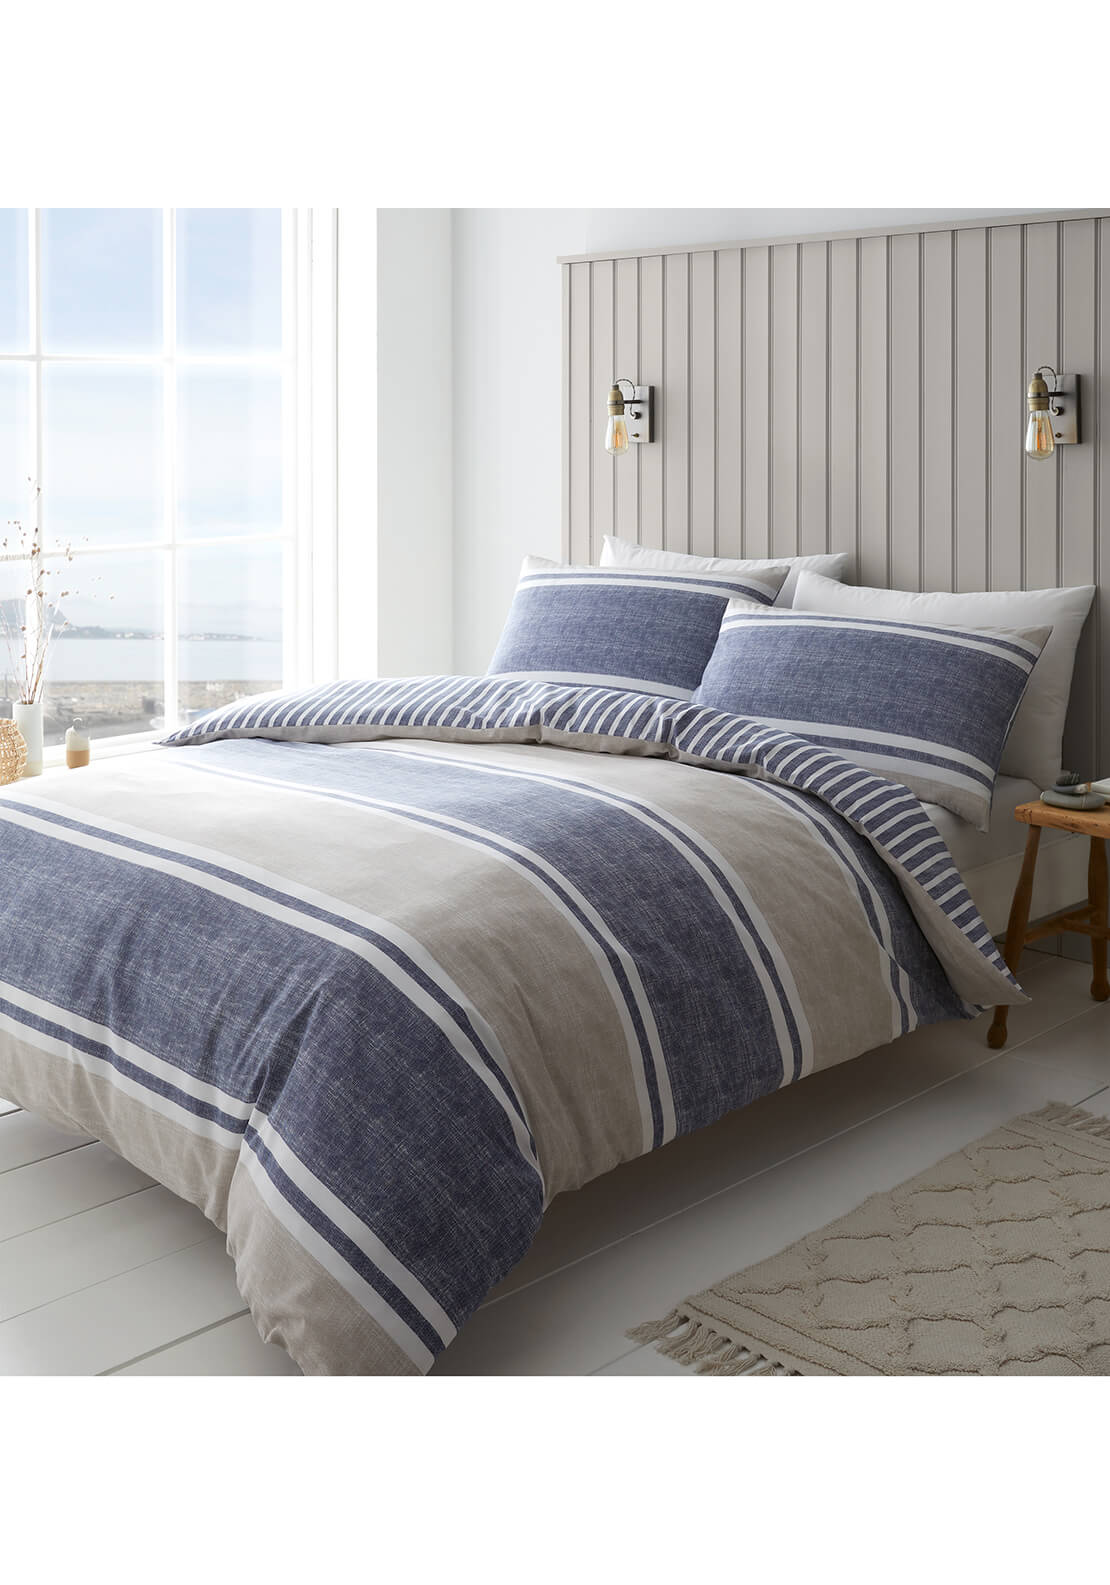  The Home Collection Classic Textured Banded Stripe Reversible Duvet Cover Set - Blue 1 Shaws Department Stores